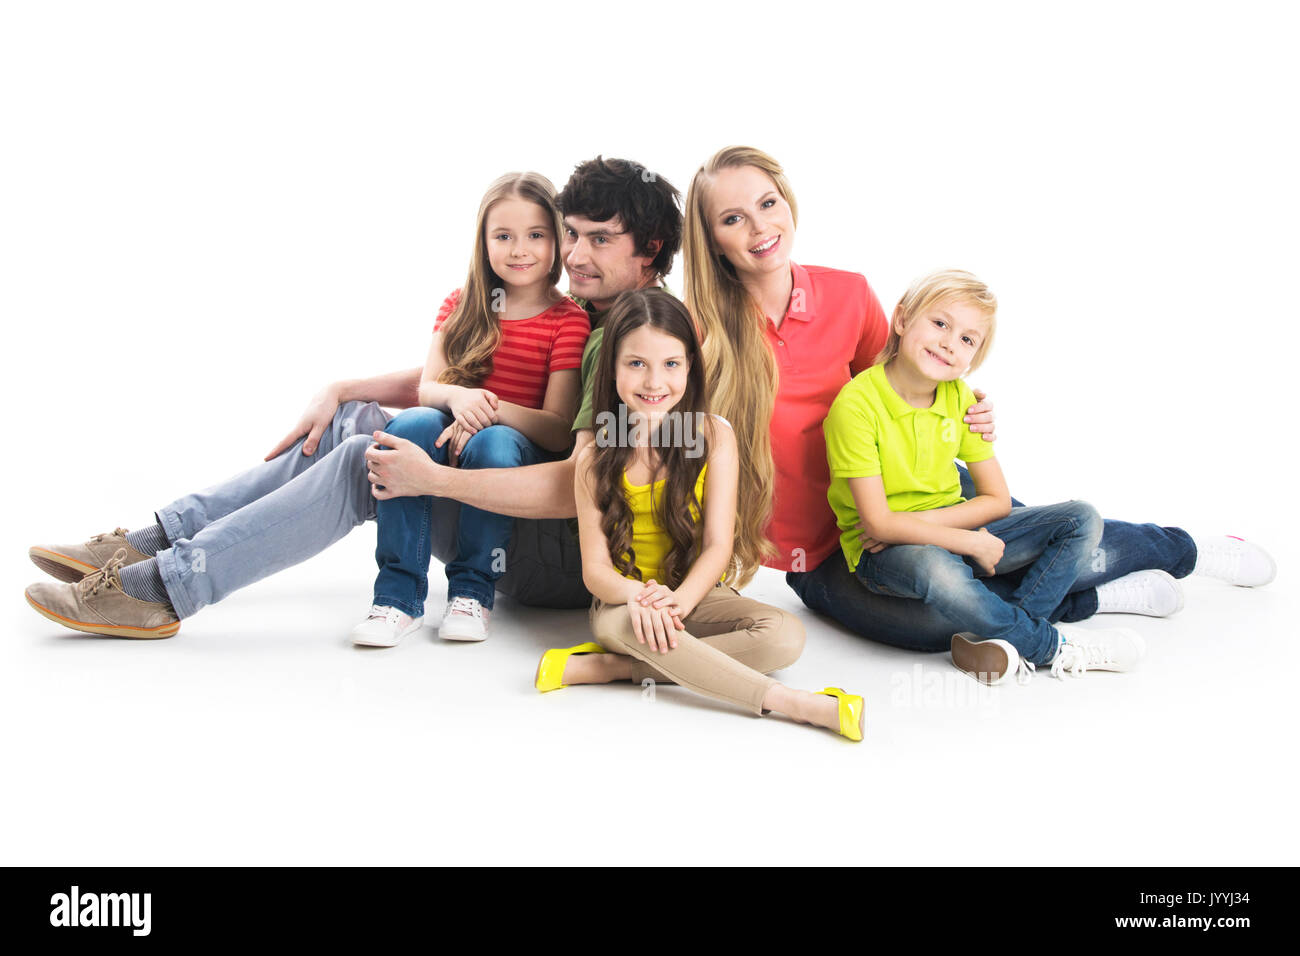 Happy smiling family of two parents and three children sitting on the floor studio isolated on white background Stock Photo